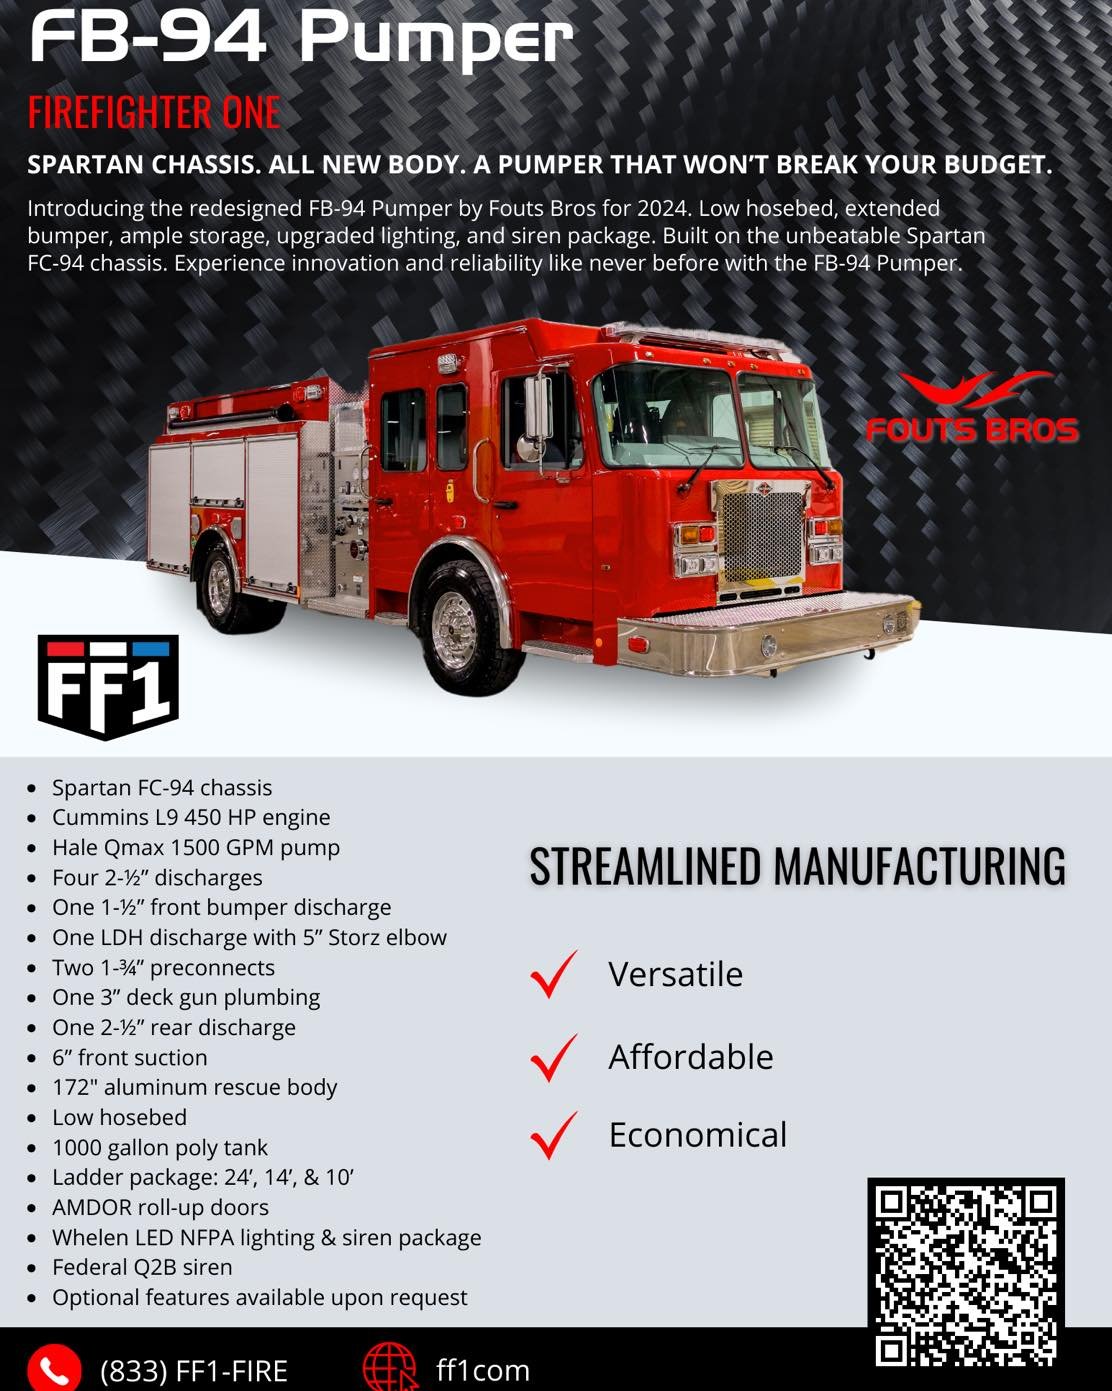 Our Fouts Bros Pumpers are available now! The new 2024 model has been designed with an extremely LOW hose bed!! Check out some specifics below. If you think this pumper would fit great in your department and budget reach out to us today!!

@foutsbros